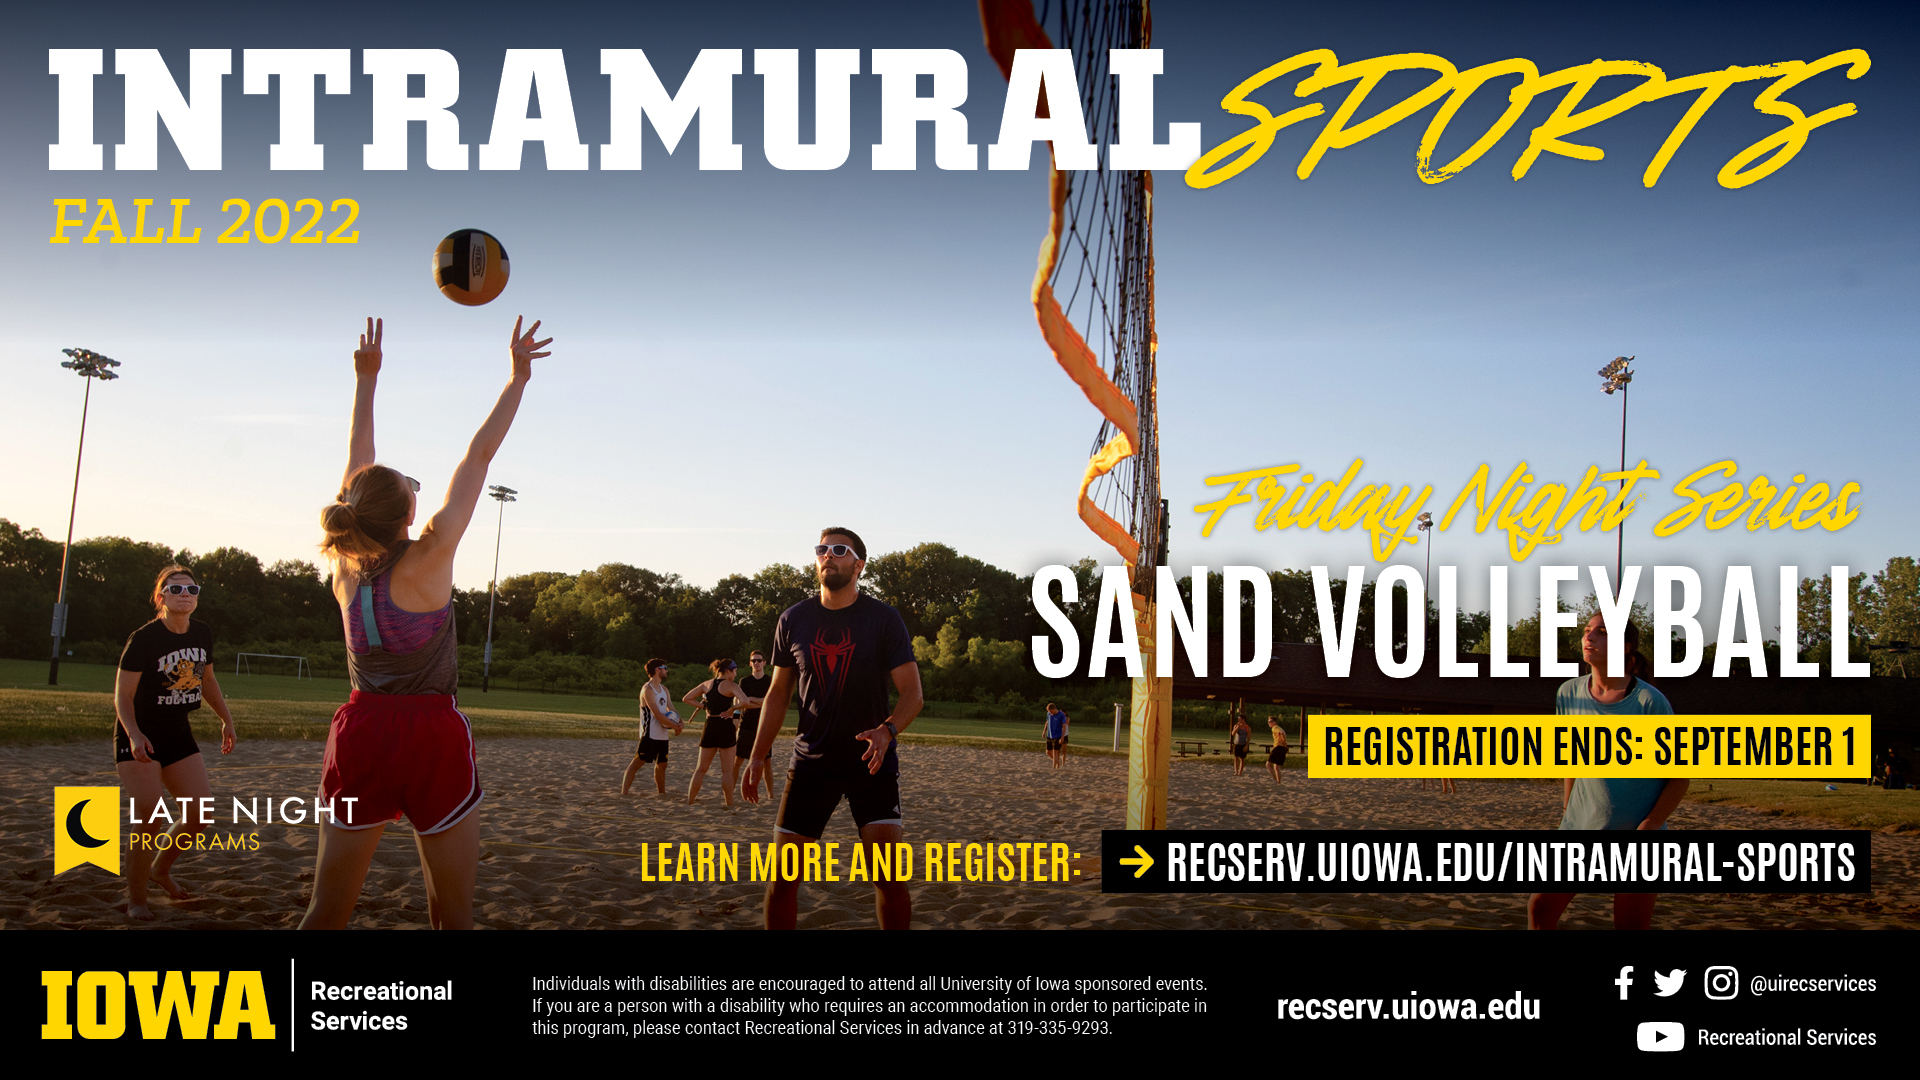 Intramural Sports Fall 2022: FNS Sand Volleyball. Learn more and register at reserv.uiowa.edu/intramural-sports